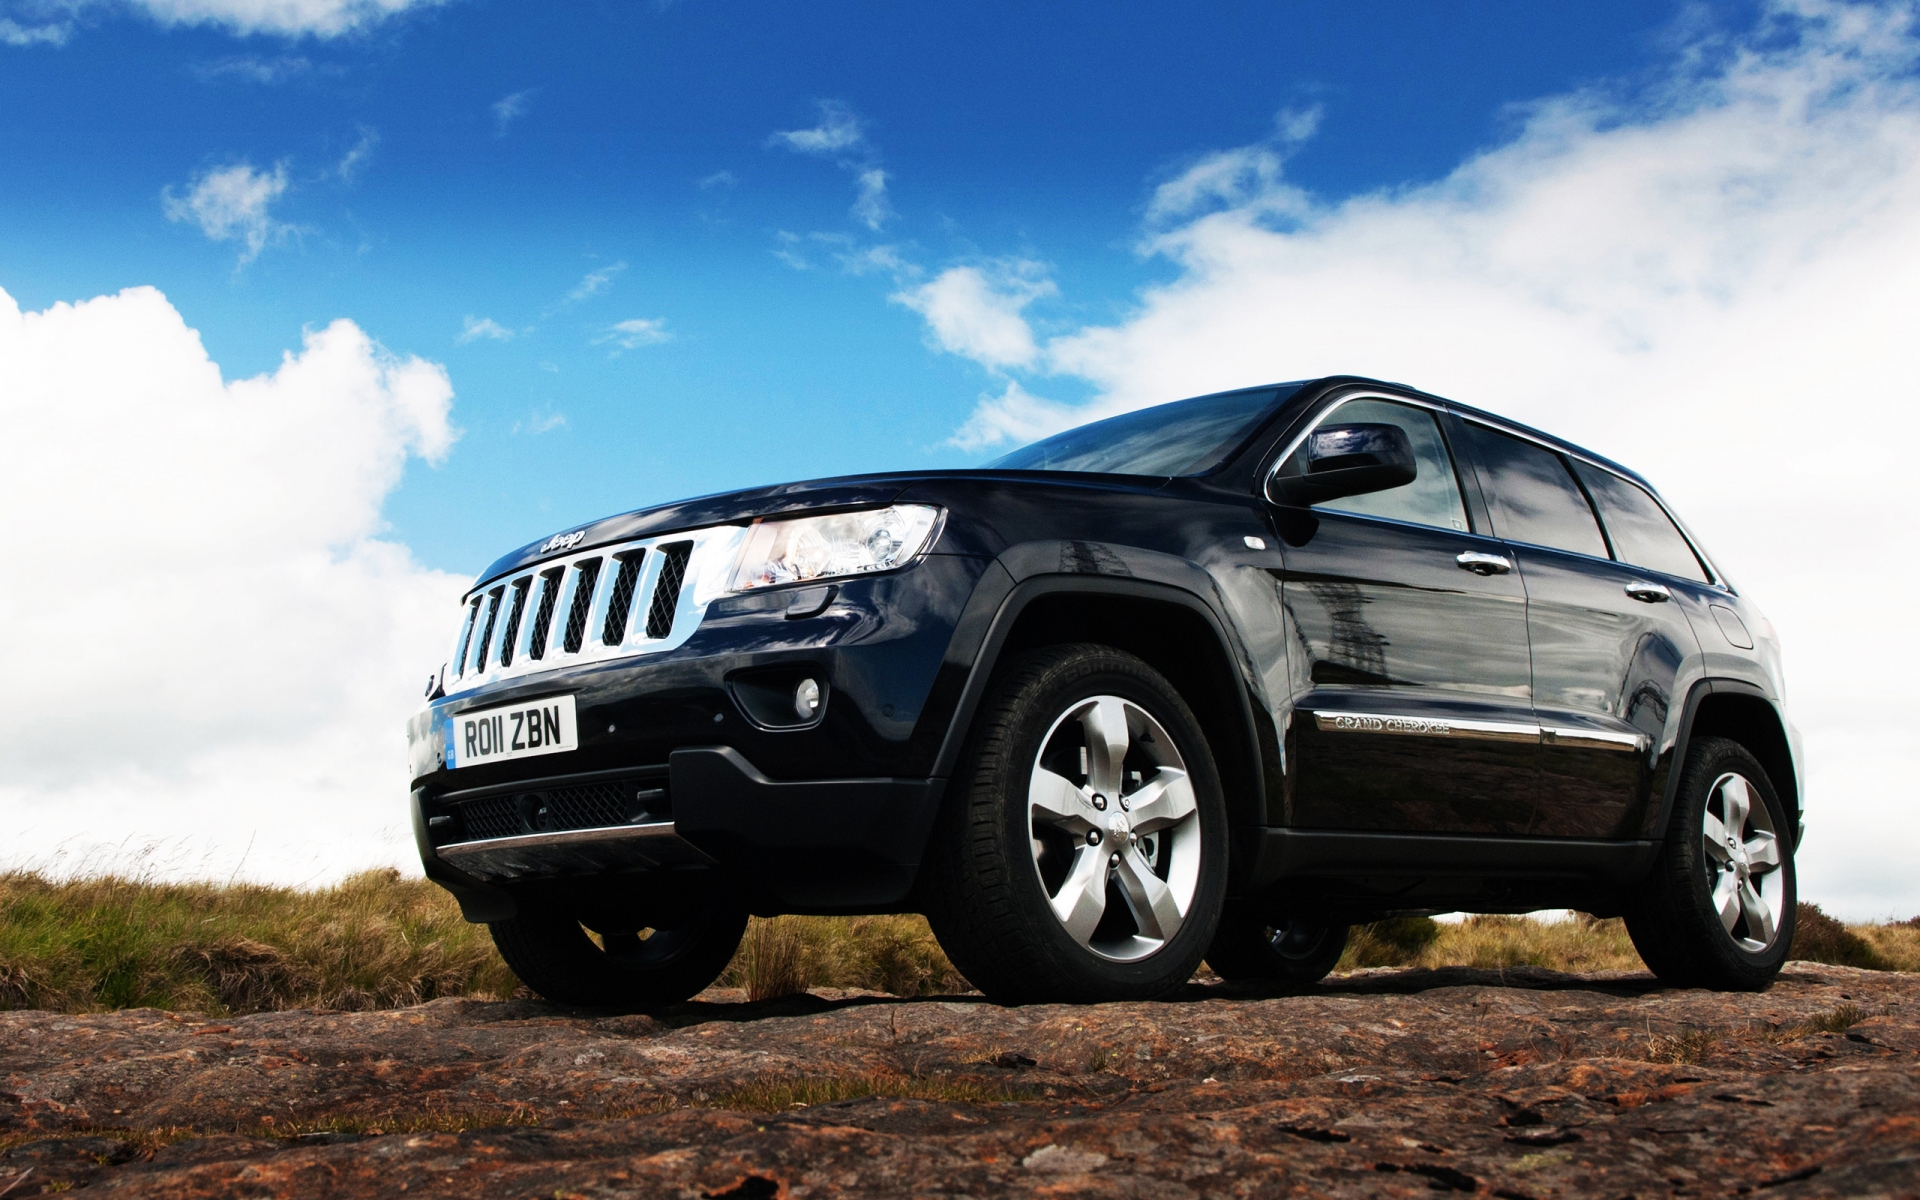 2011 Jeep Grand Cherokee for 1920 x 1200 widescreen resolution